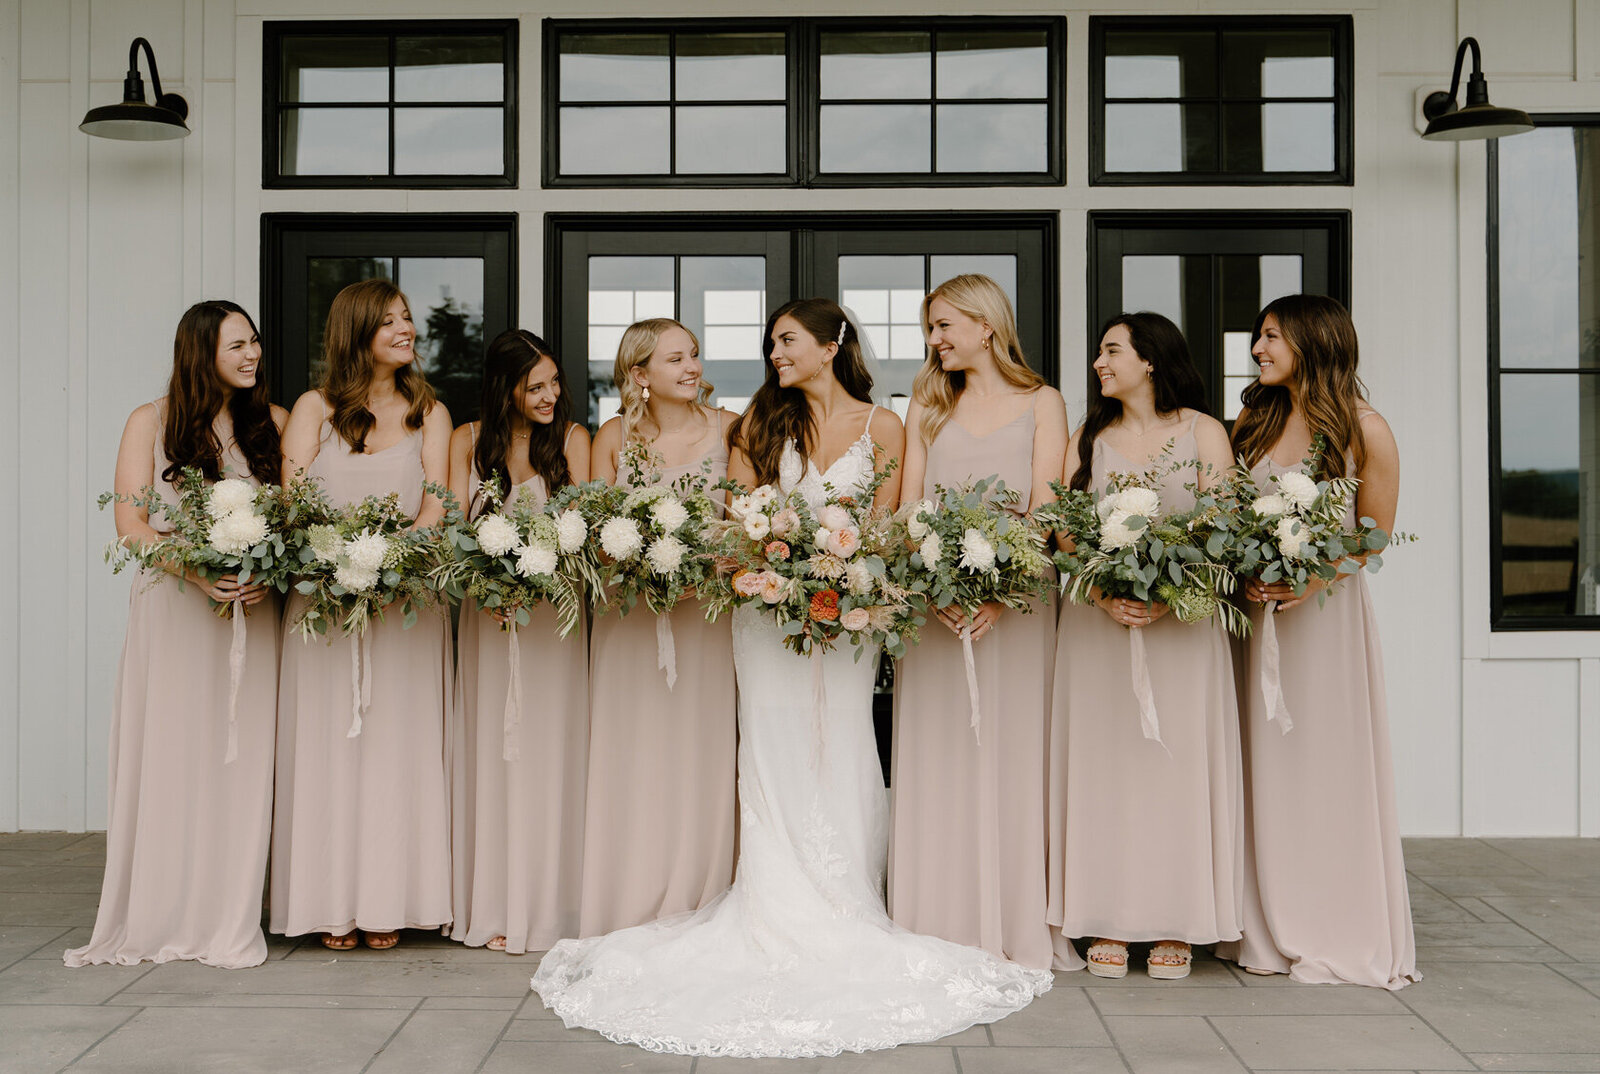 Photo of bridesmaids in a blush colored dresses at a dreamy Virginia Wedding